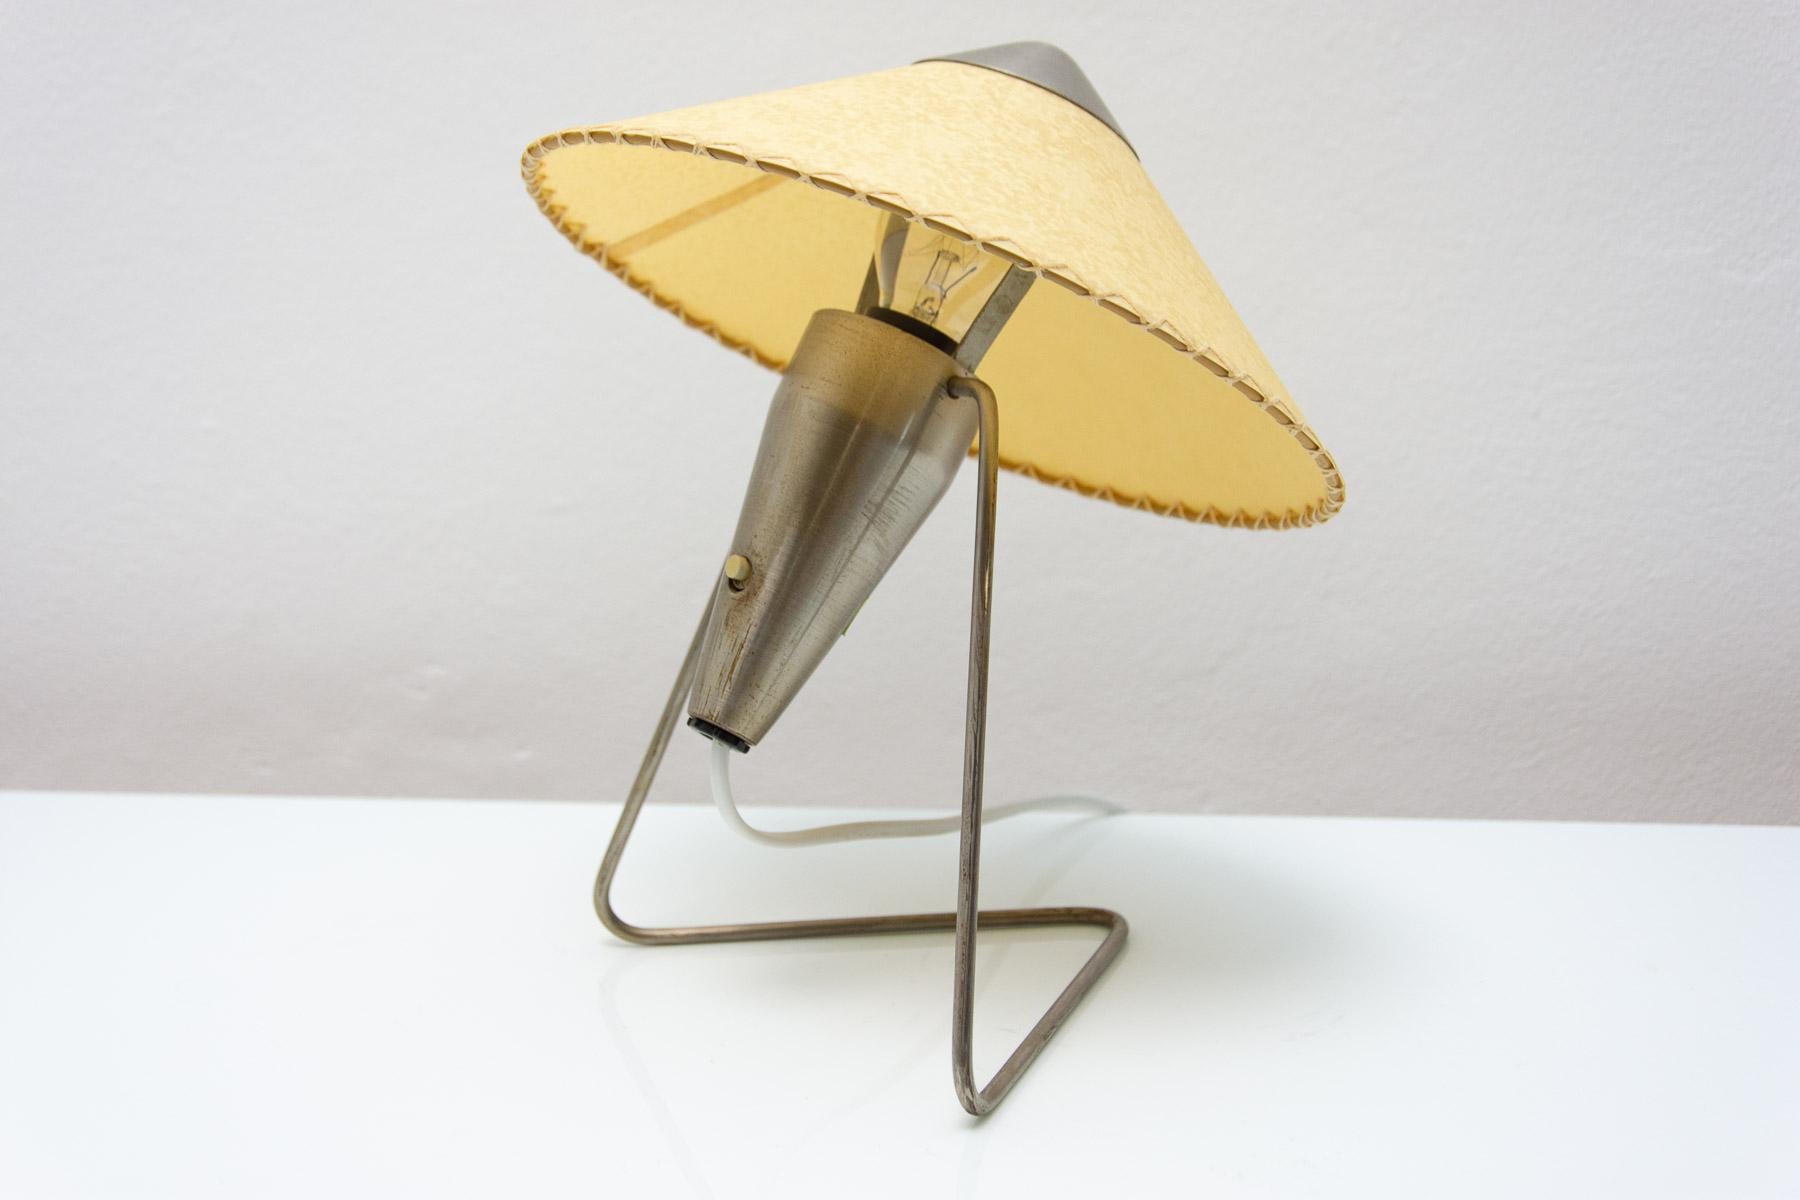 Mid century modern desk lamp was designed by Helena Frantova and produced by Okolo in the 1950 in the former Czechoslovakia.  It has chrome structure.

This lamp was made by Žukov company.

This table lamp exists in several variations. Made with a